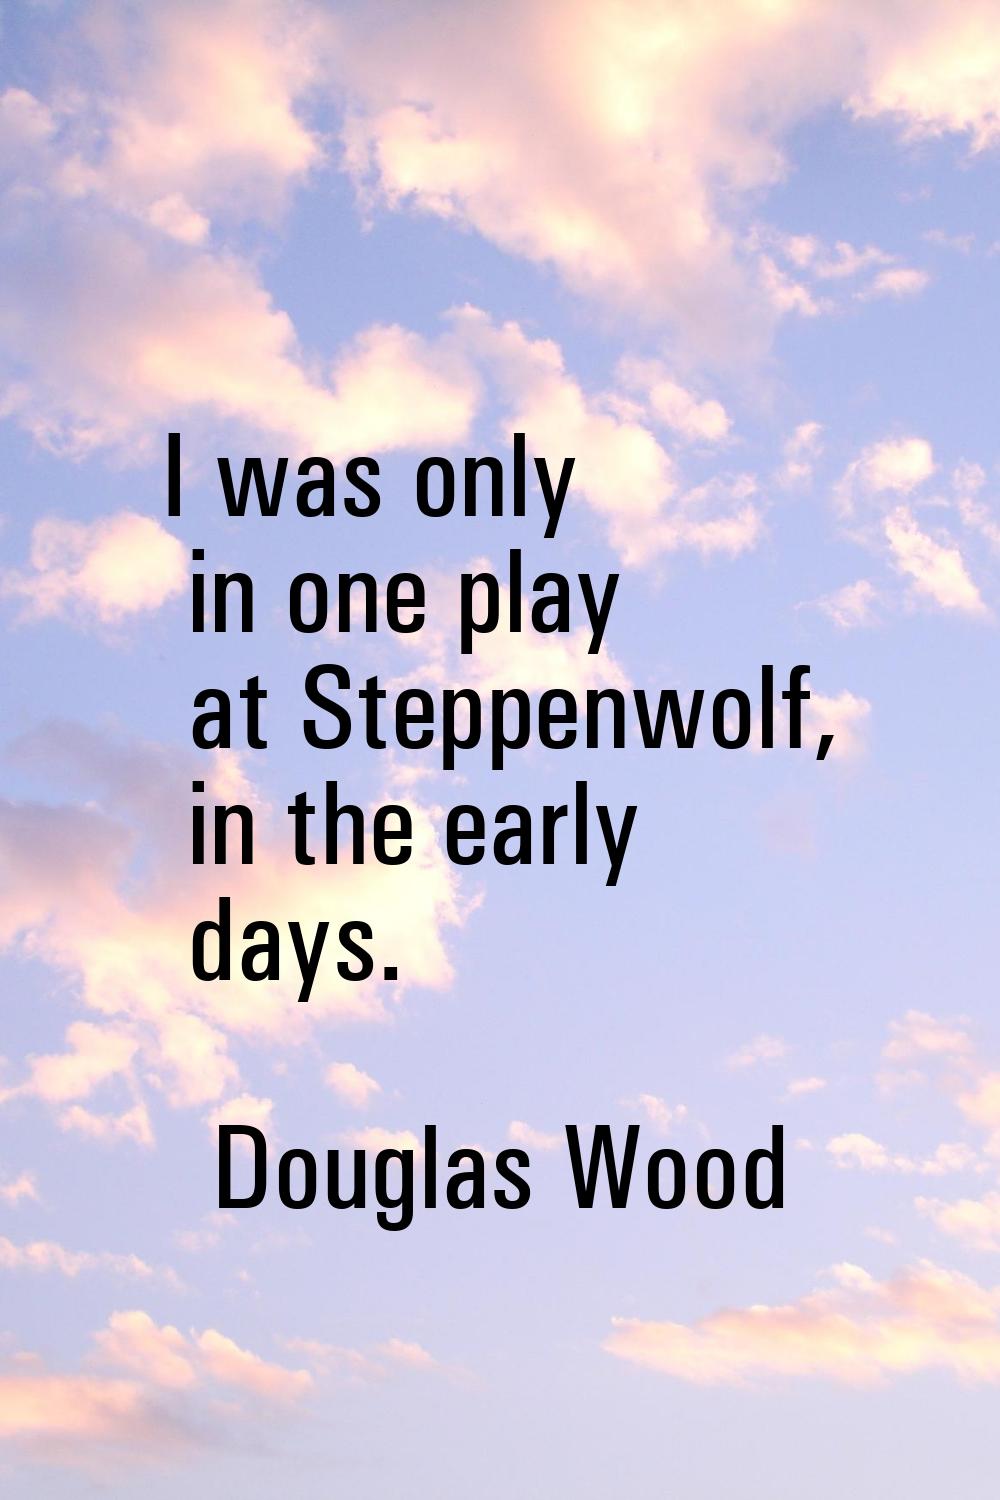 I was only in one play at Steppenwolf, in the early days.